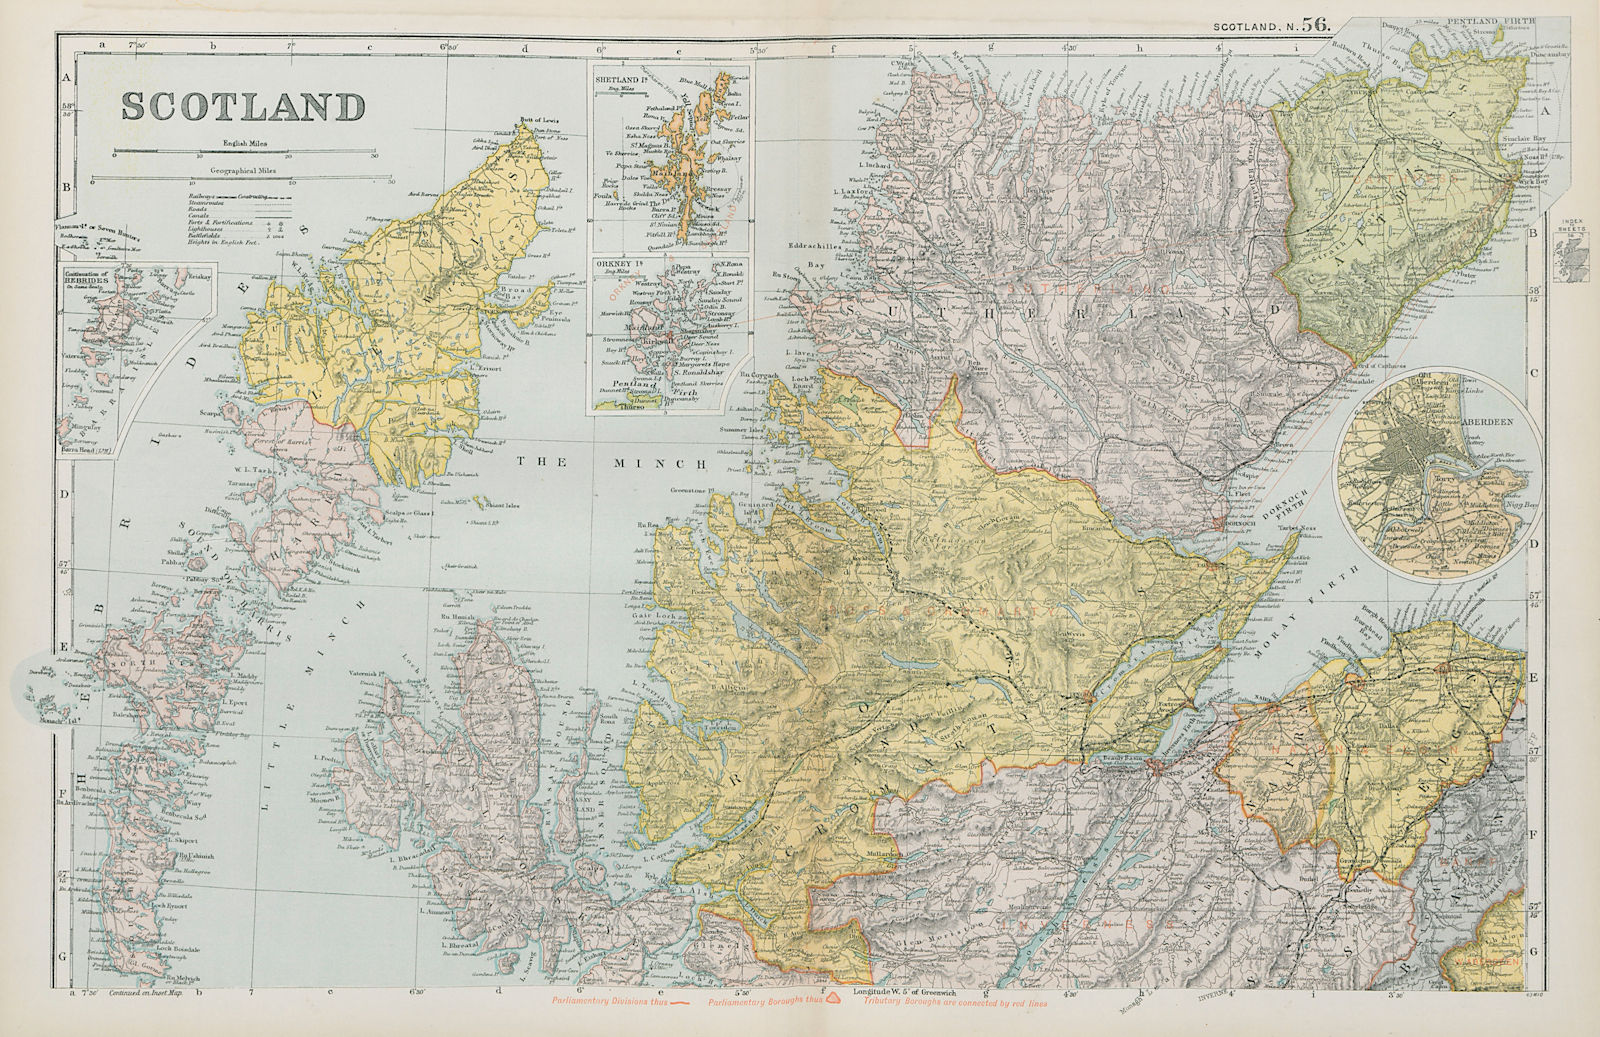 SCOTTISH HIGHLANDS & ISLANDS. Parliamentary divisions & boroughs. BACON 1900 map